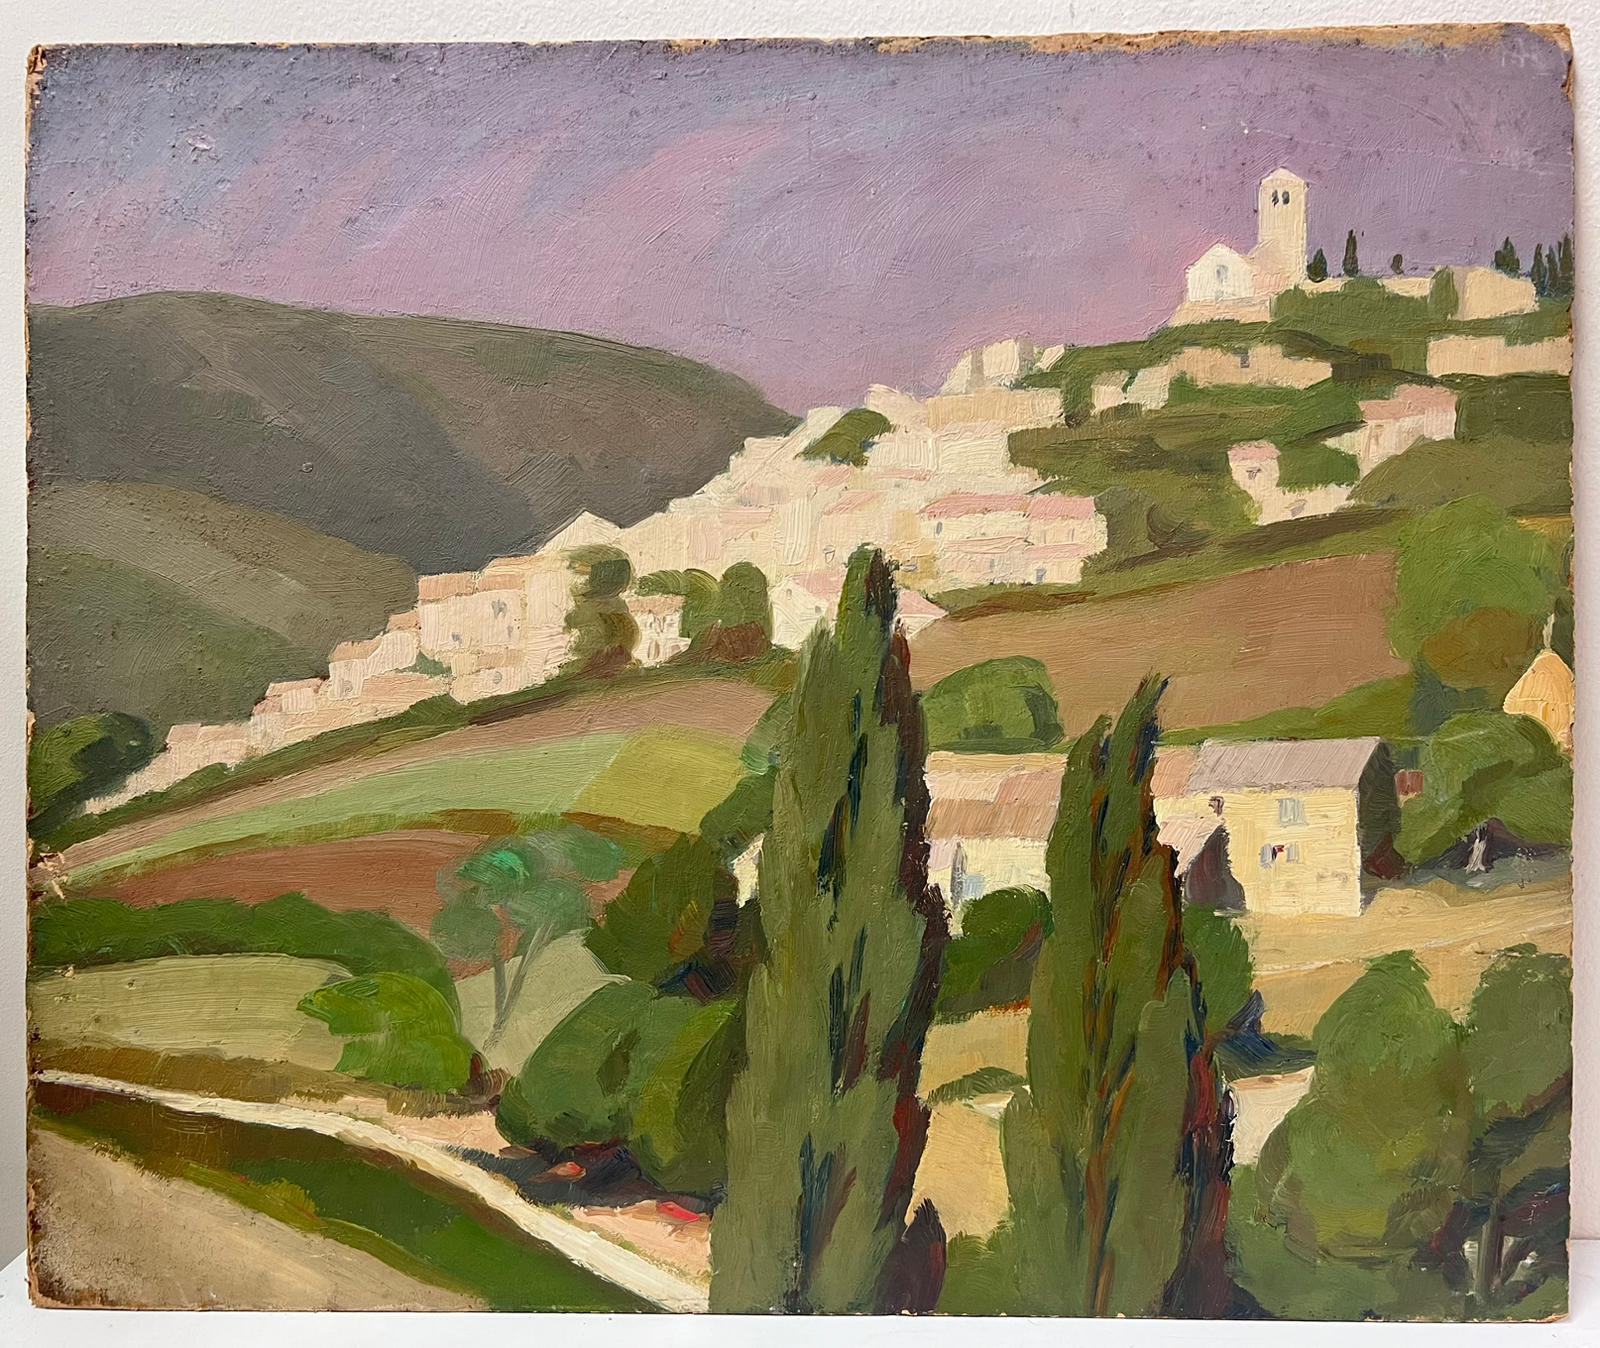 The Provencal Landscape
French School, mid 20th century
oil on board, unframed
board: 15 x 18 inches
provenance: private collection, France
condition: very good and sound condition